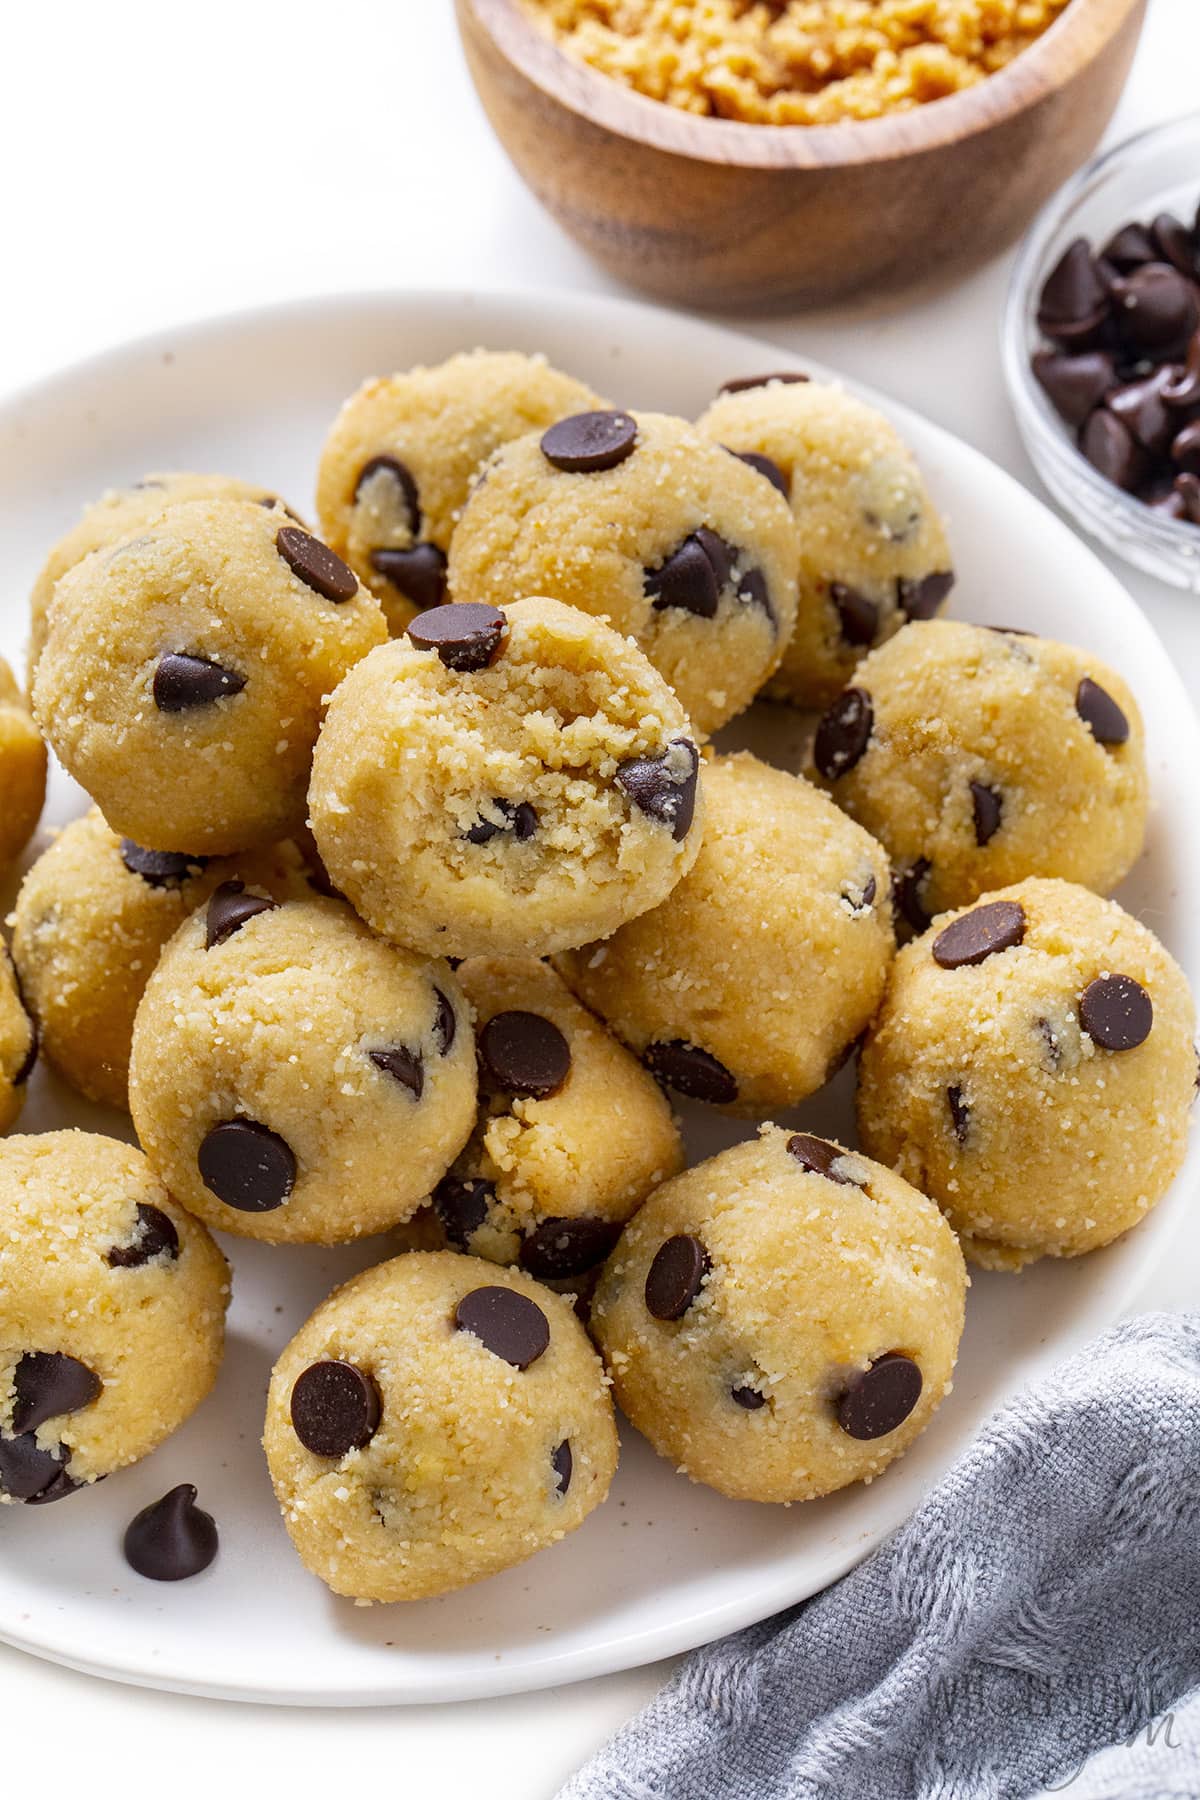 Sugar-free cookie dough bites on a serving platter, with a bite taken out.